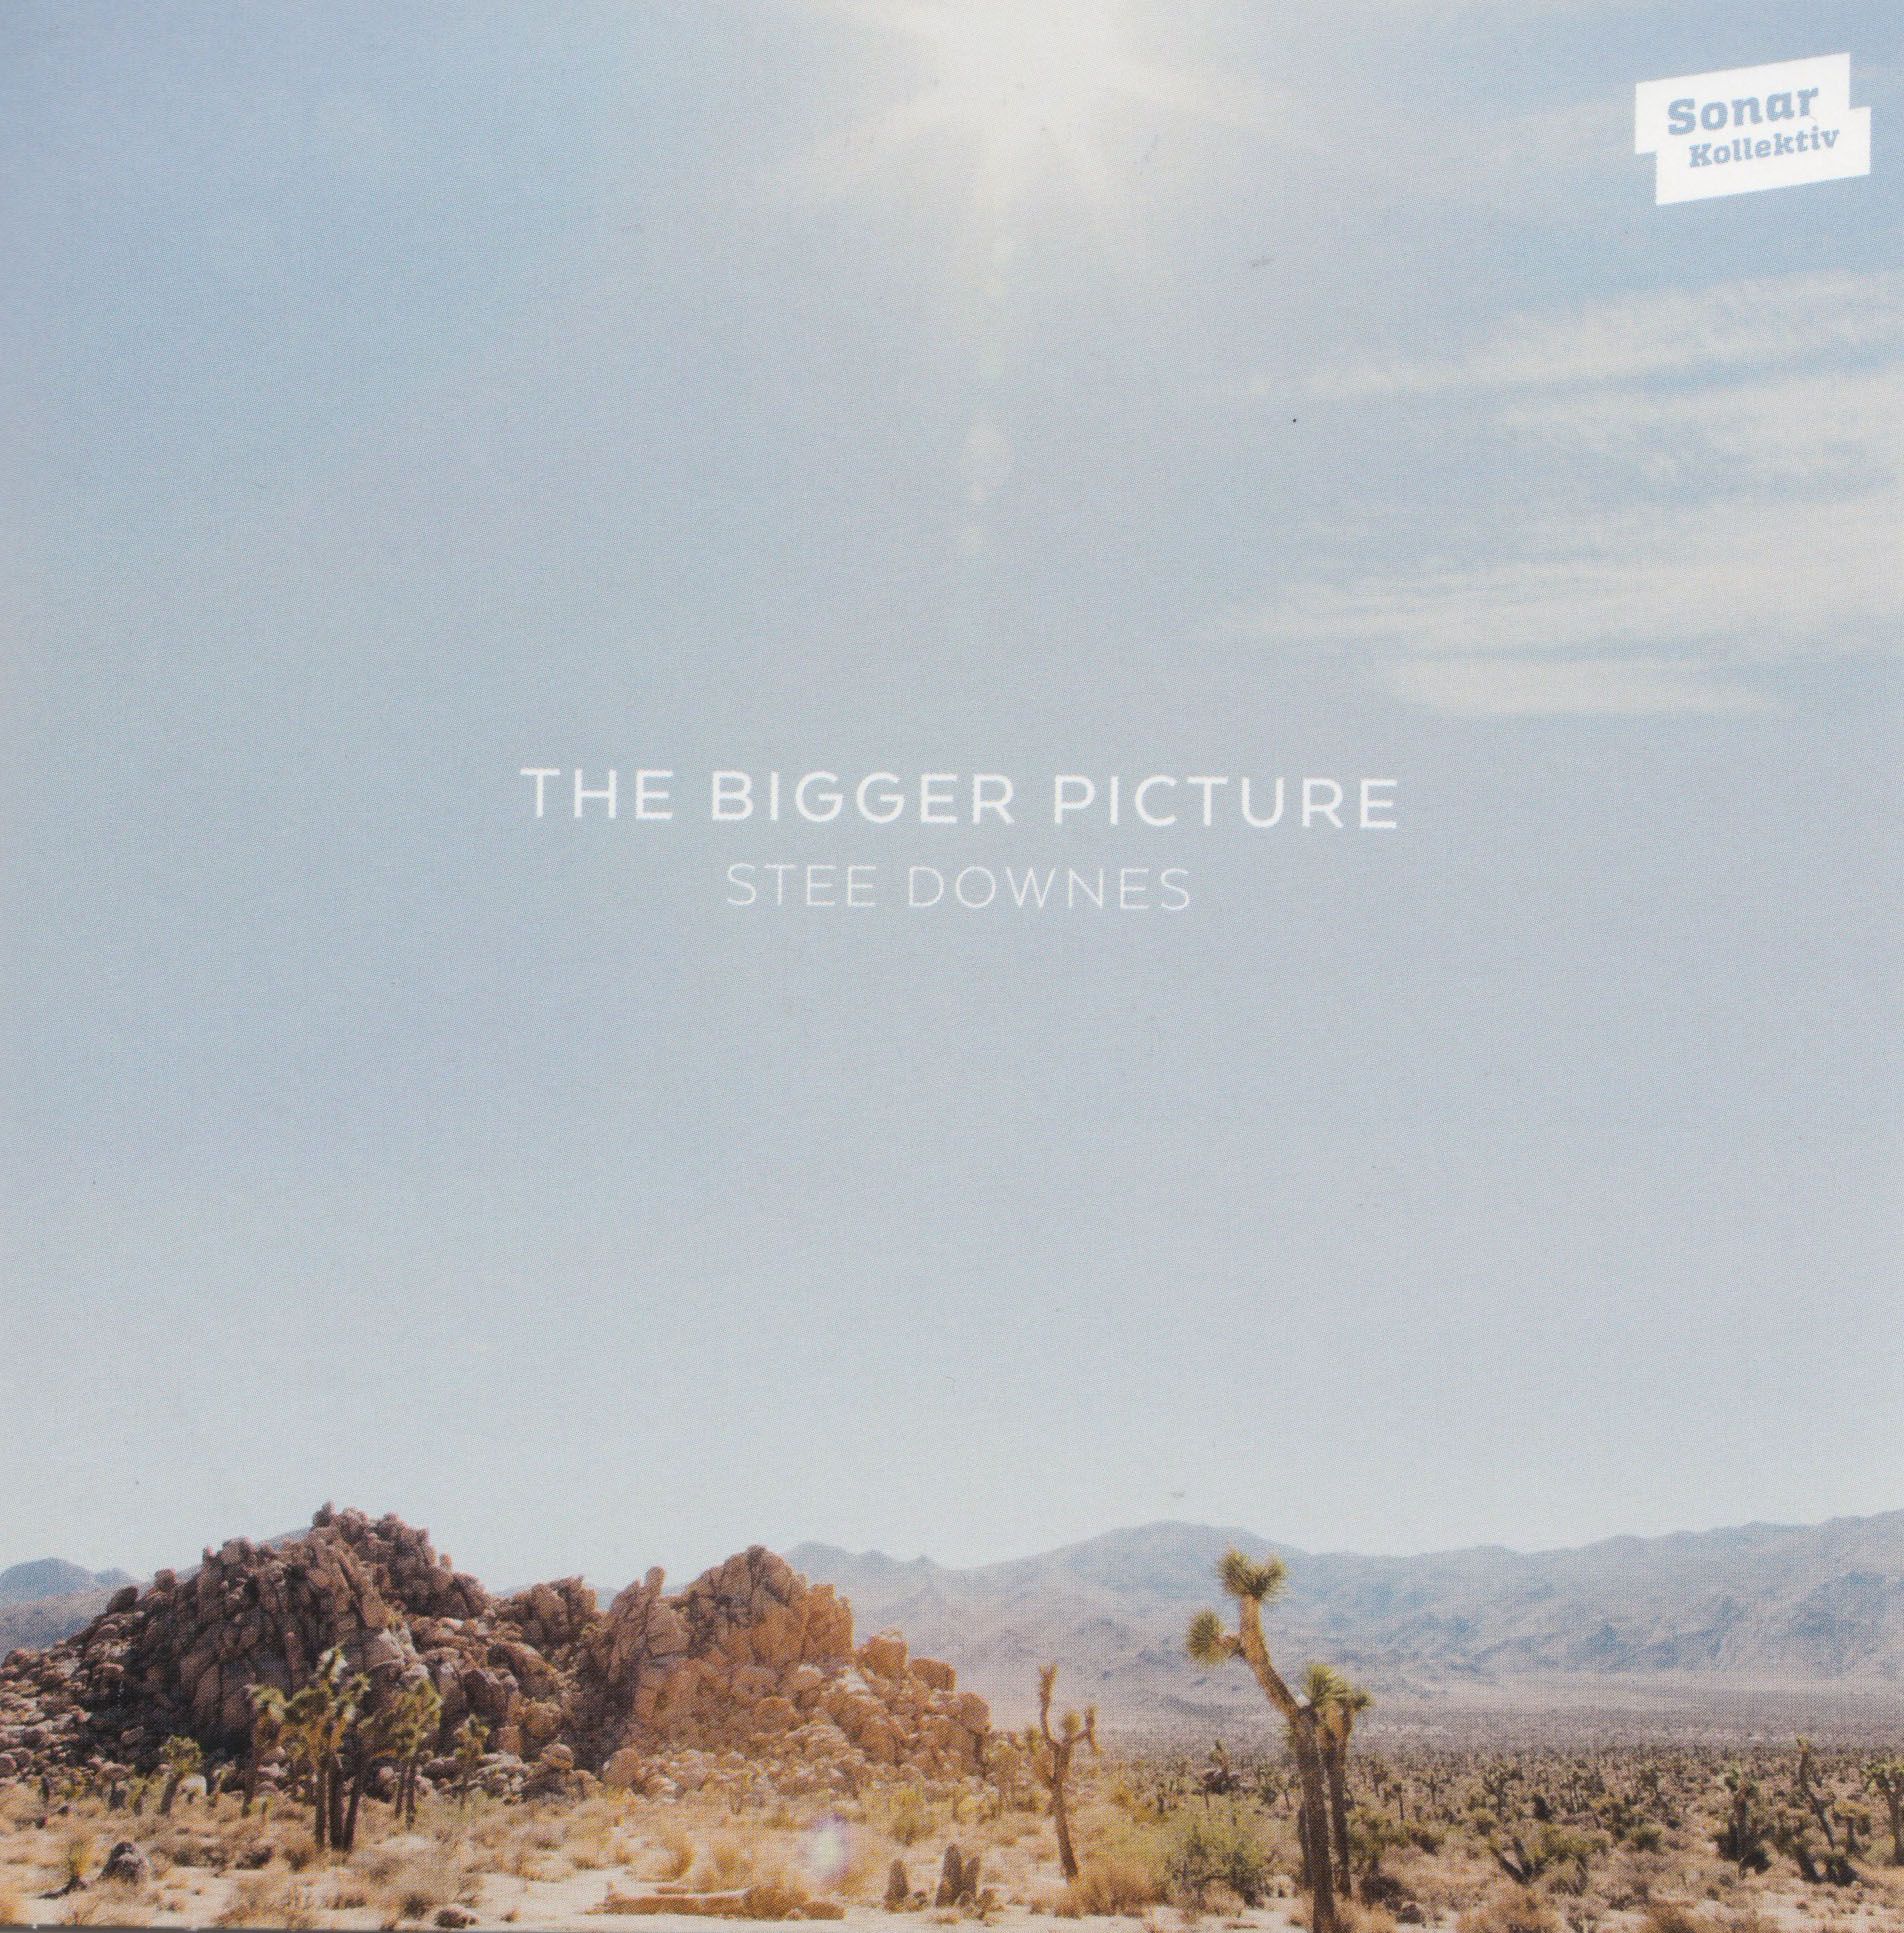 stee_downes_cover_300dpi.jpg